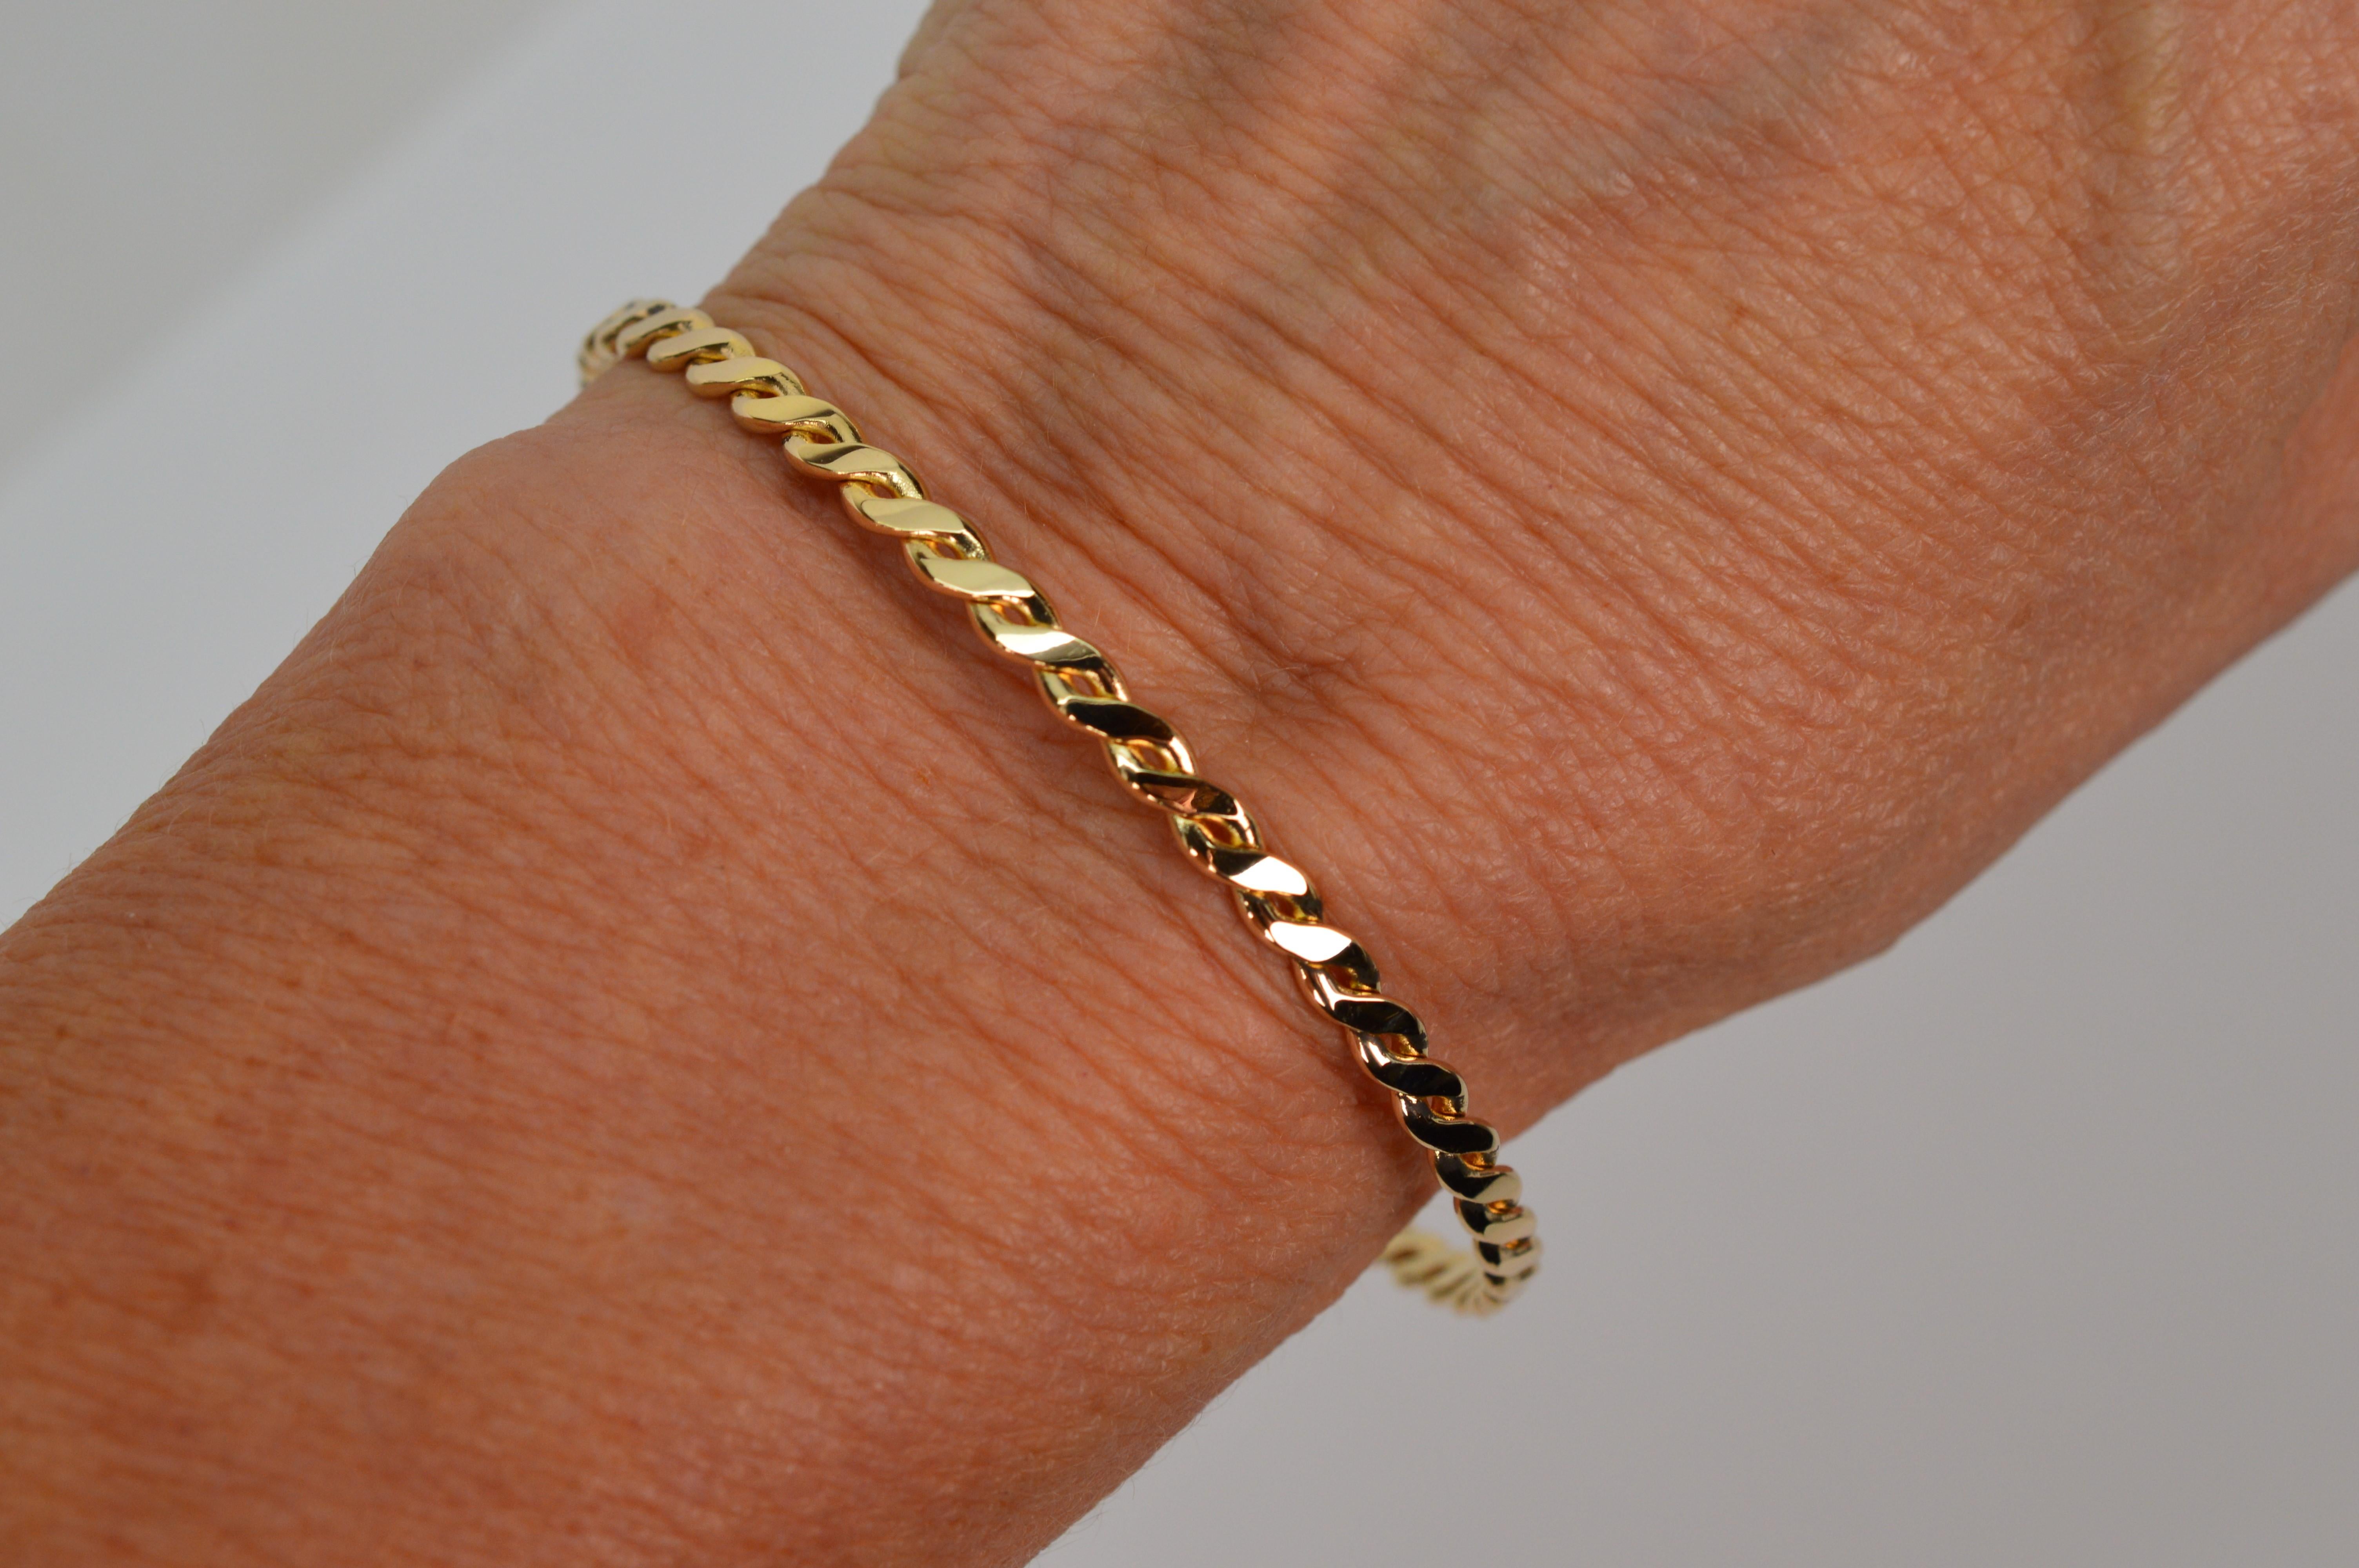 Slender 14 Karat Yellow Gold Twist Bangle Bracelet In New Condition For Sale In Mount Kisco, NY